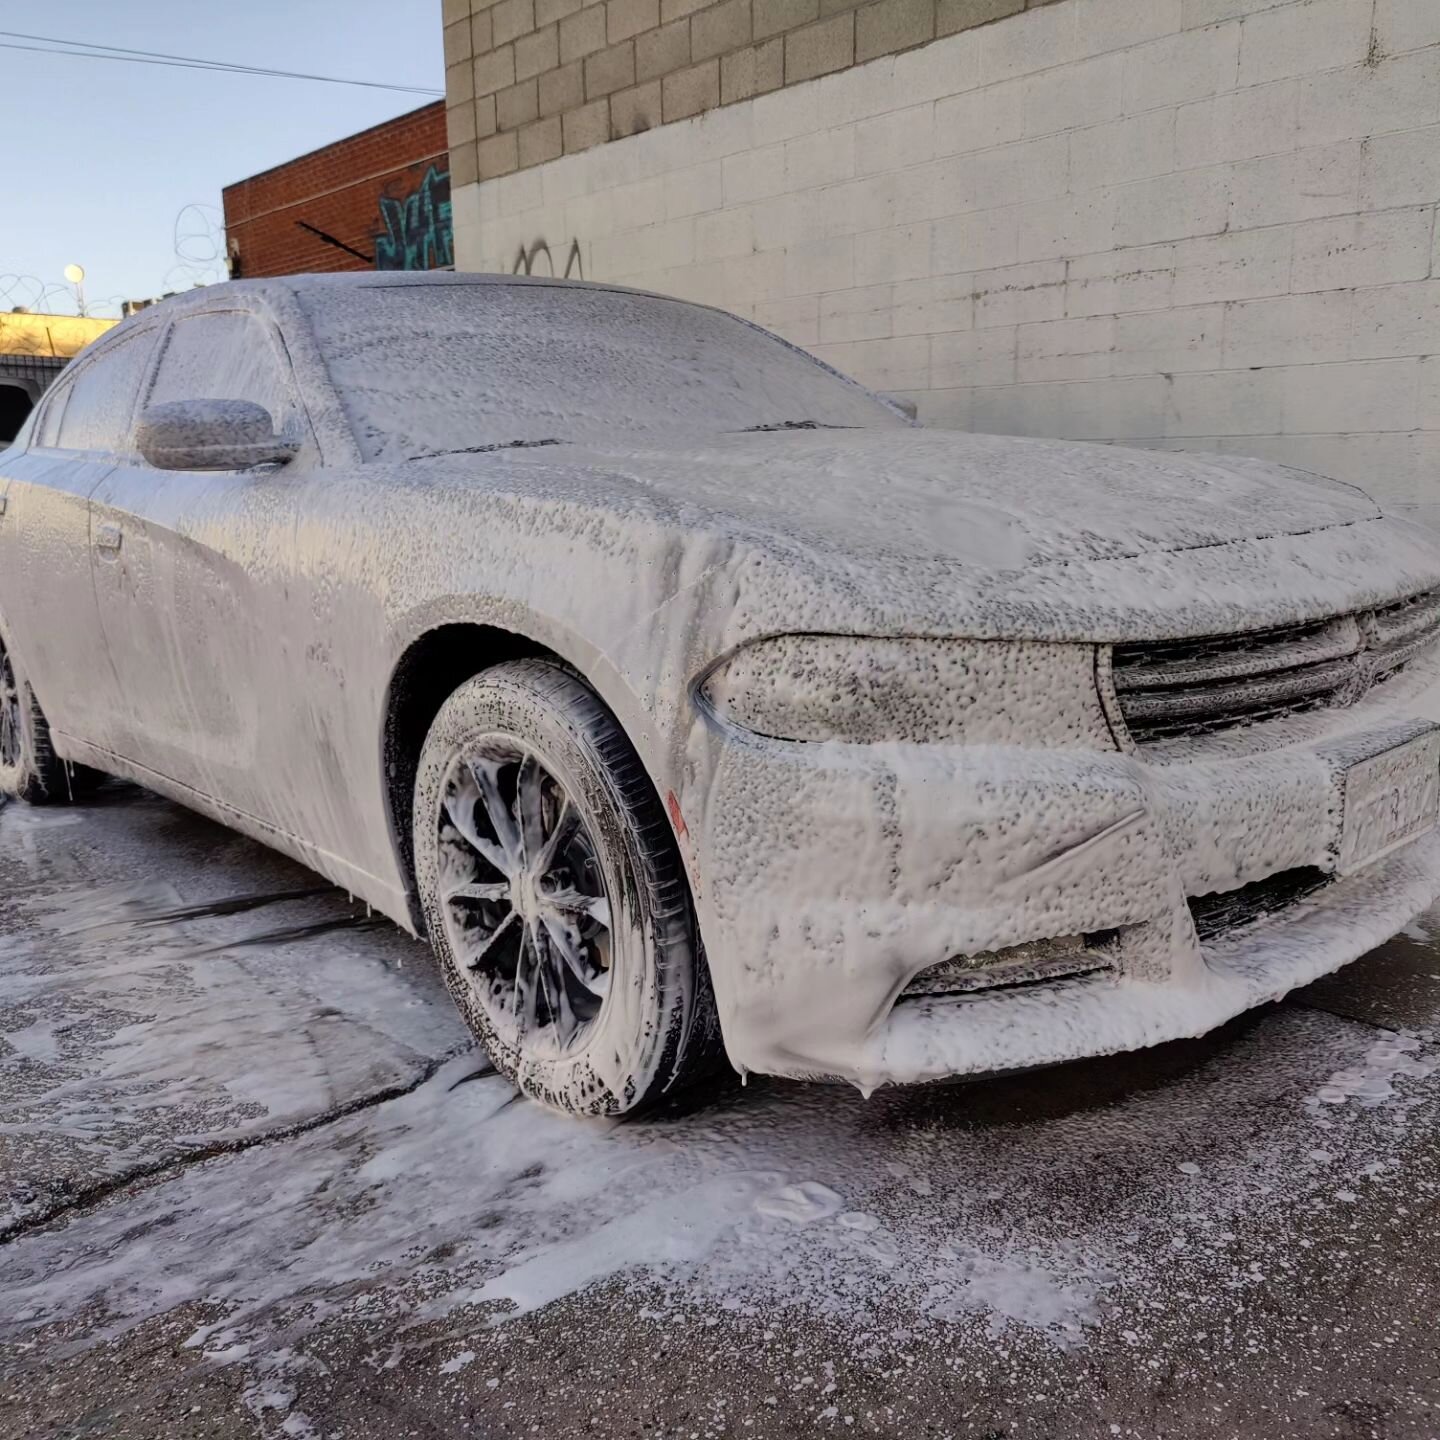 Basic Wash Package + Pet Hair removal on a Dodge Charger. We all know sometimes pet hair can be a bit tricky to get off your seats &amp; carpets but don't worry I got you! Book your next car wash with Geo's Mobile Auto Detailing! 
.
.
.
.

.
.
.
.
#d